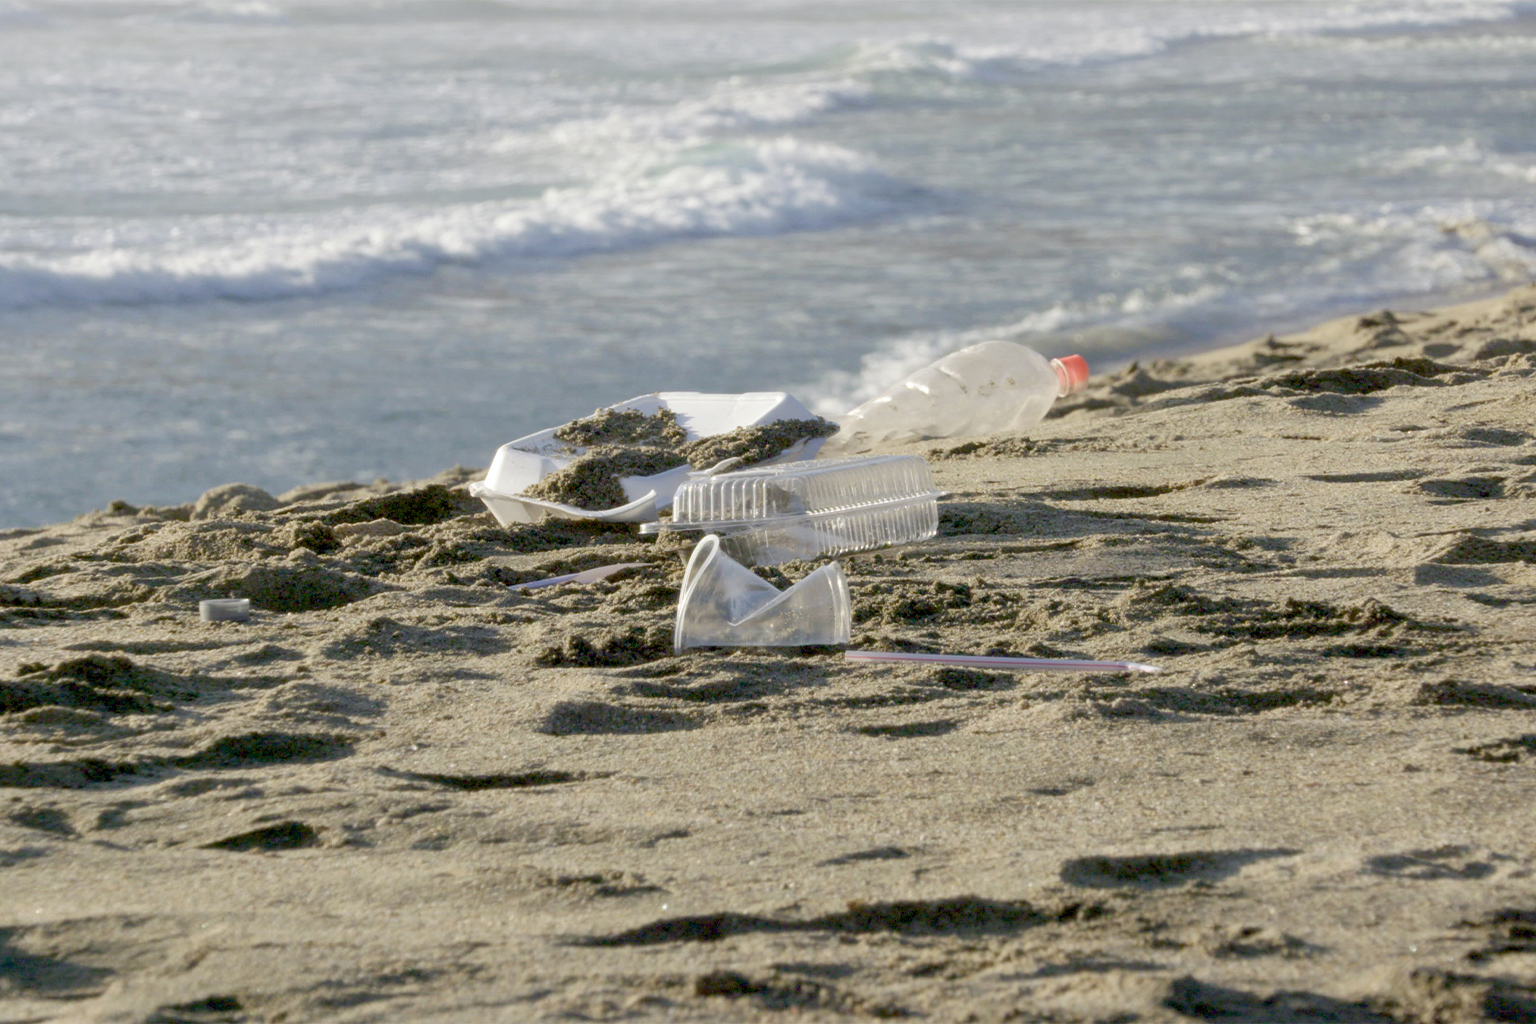 Seventy-five percent of the waste found on Chile’s beaches is plastic litter.